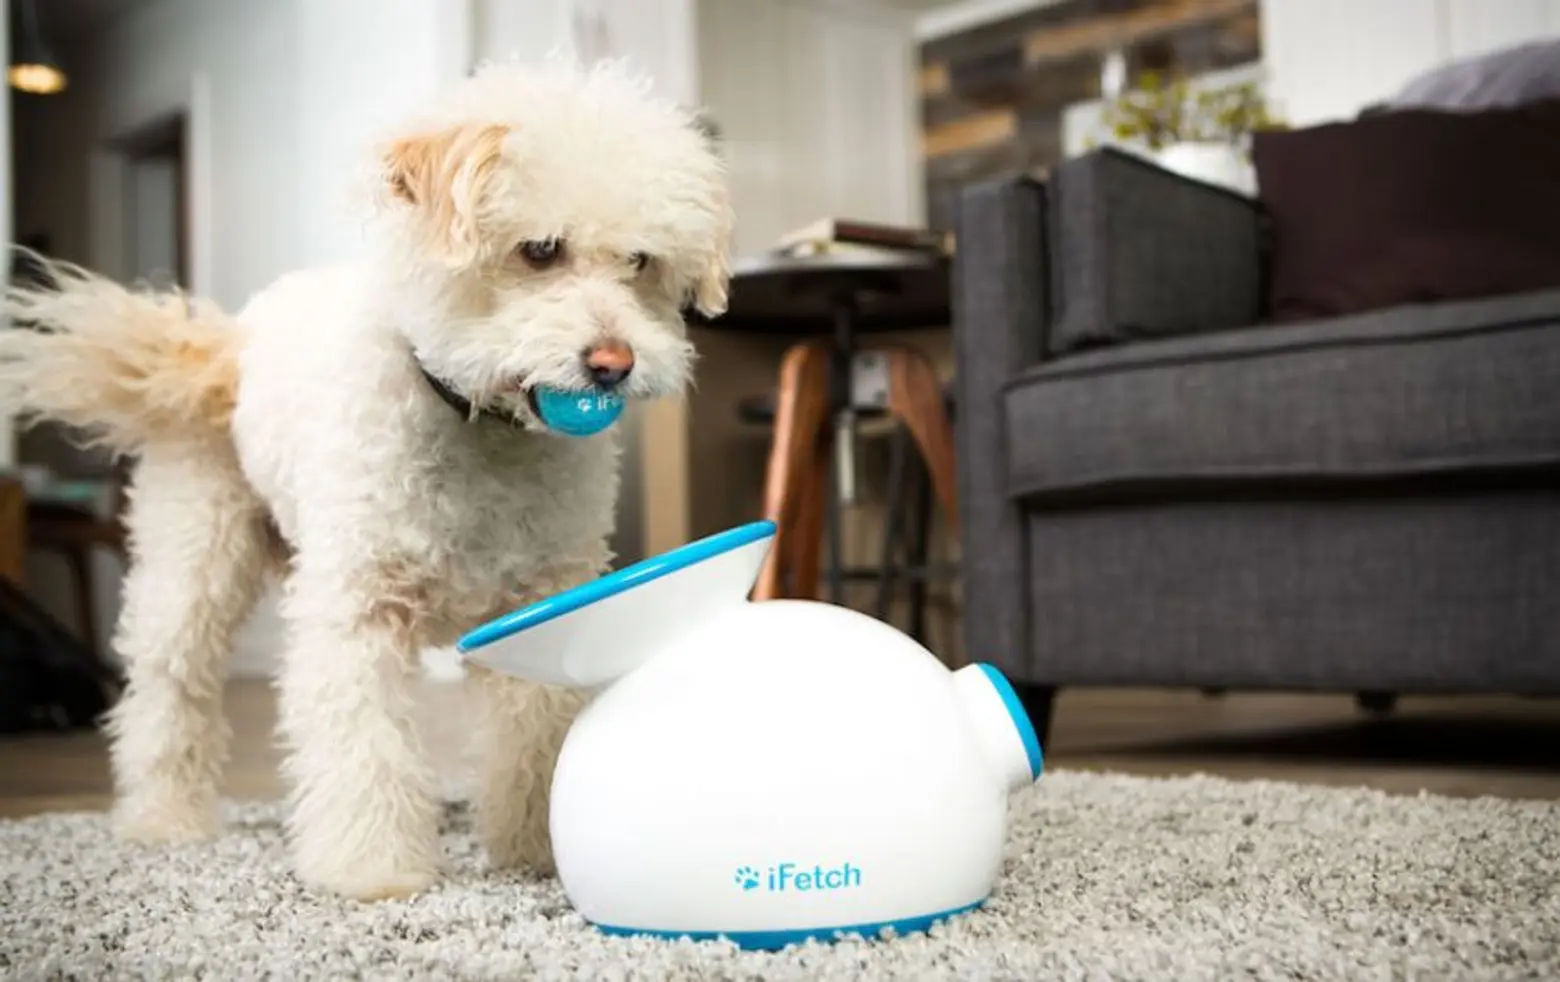 iFetch automatic ball launcher is designed for lazy dog owners